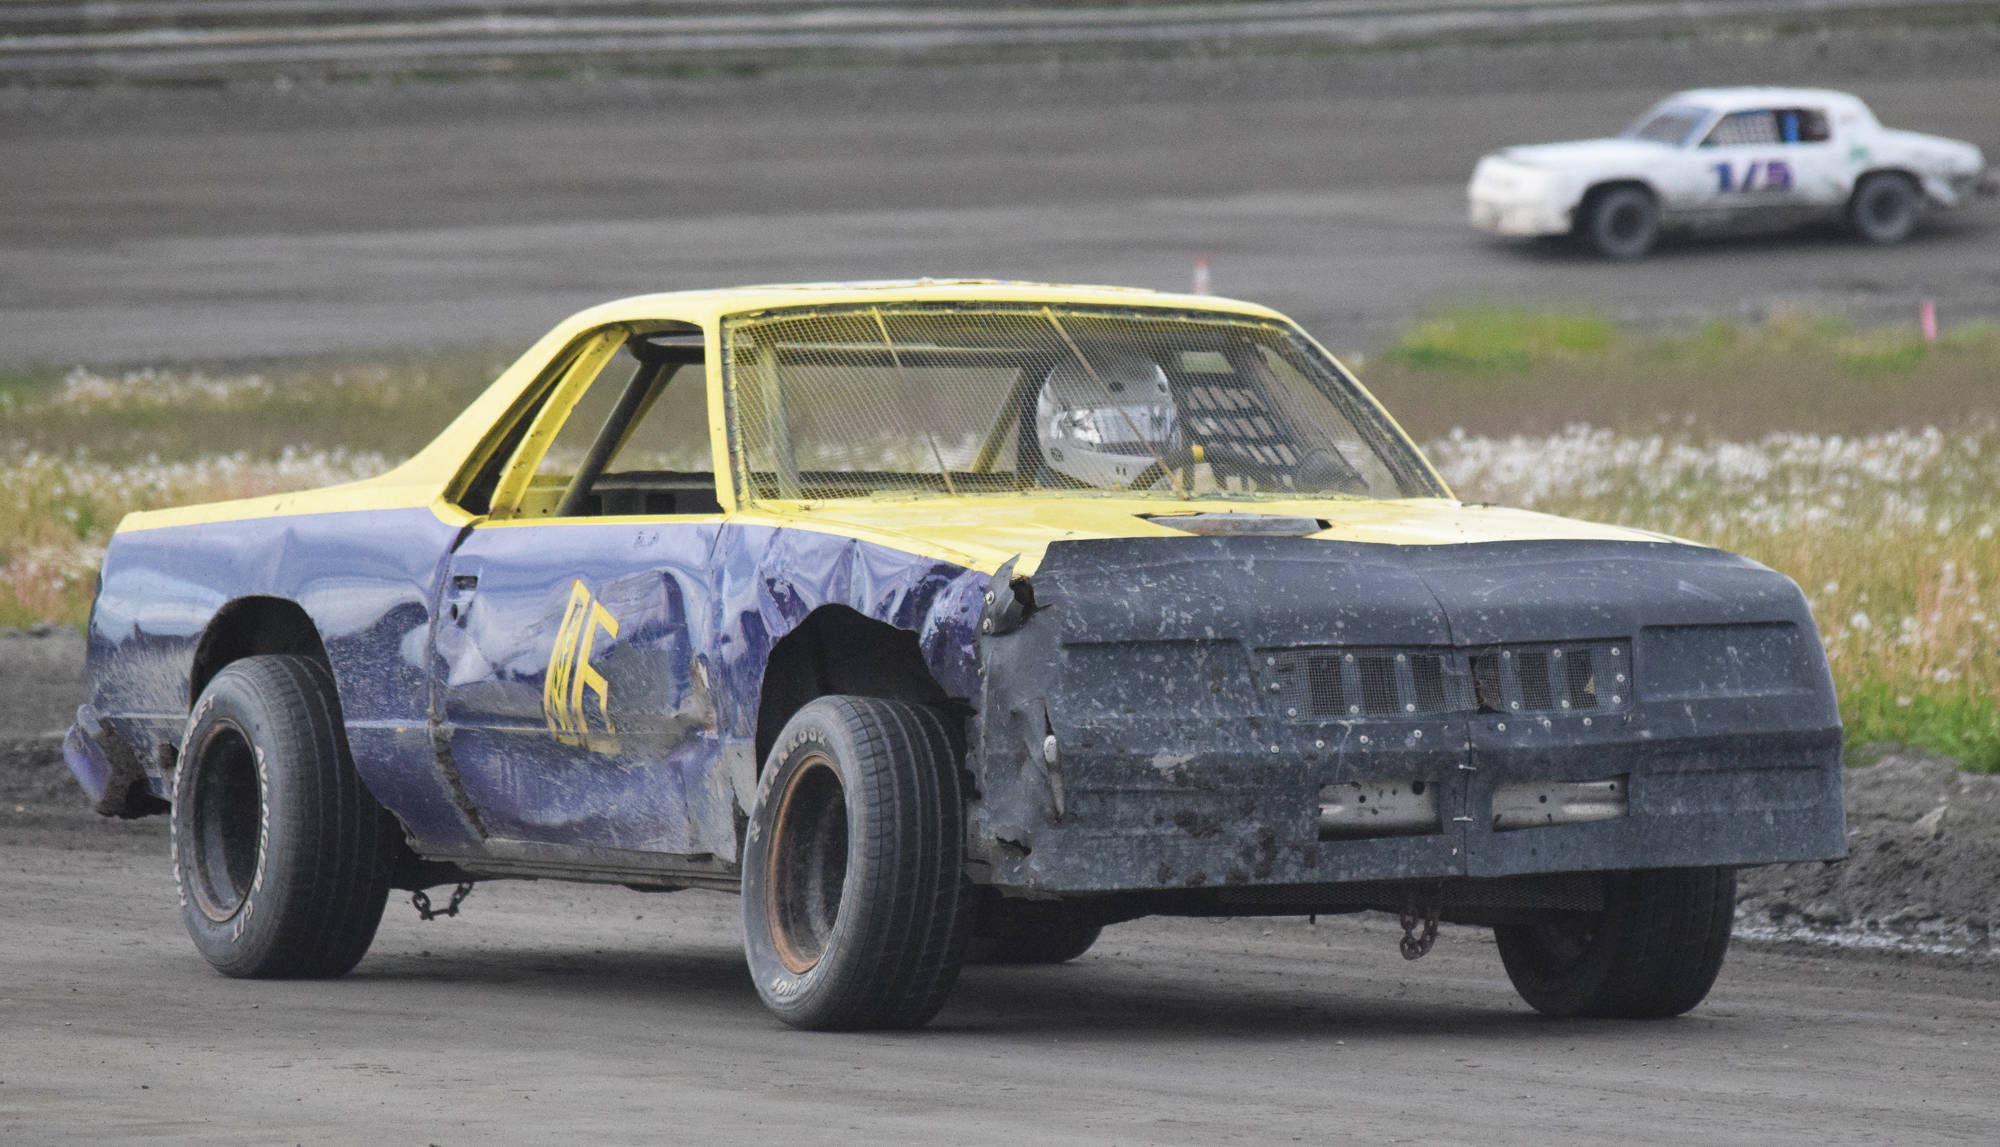 Gracie Bass celebrated her 15th birthday Saturday night at Twin City Raceway by making her dirt racing debut in the No. 16 El Camino in Kenai. (Photo by Joey Klecka/Peninsula Clarion)